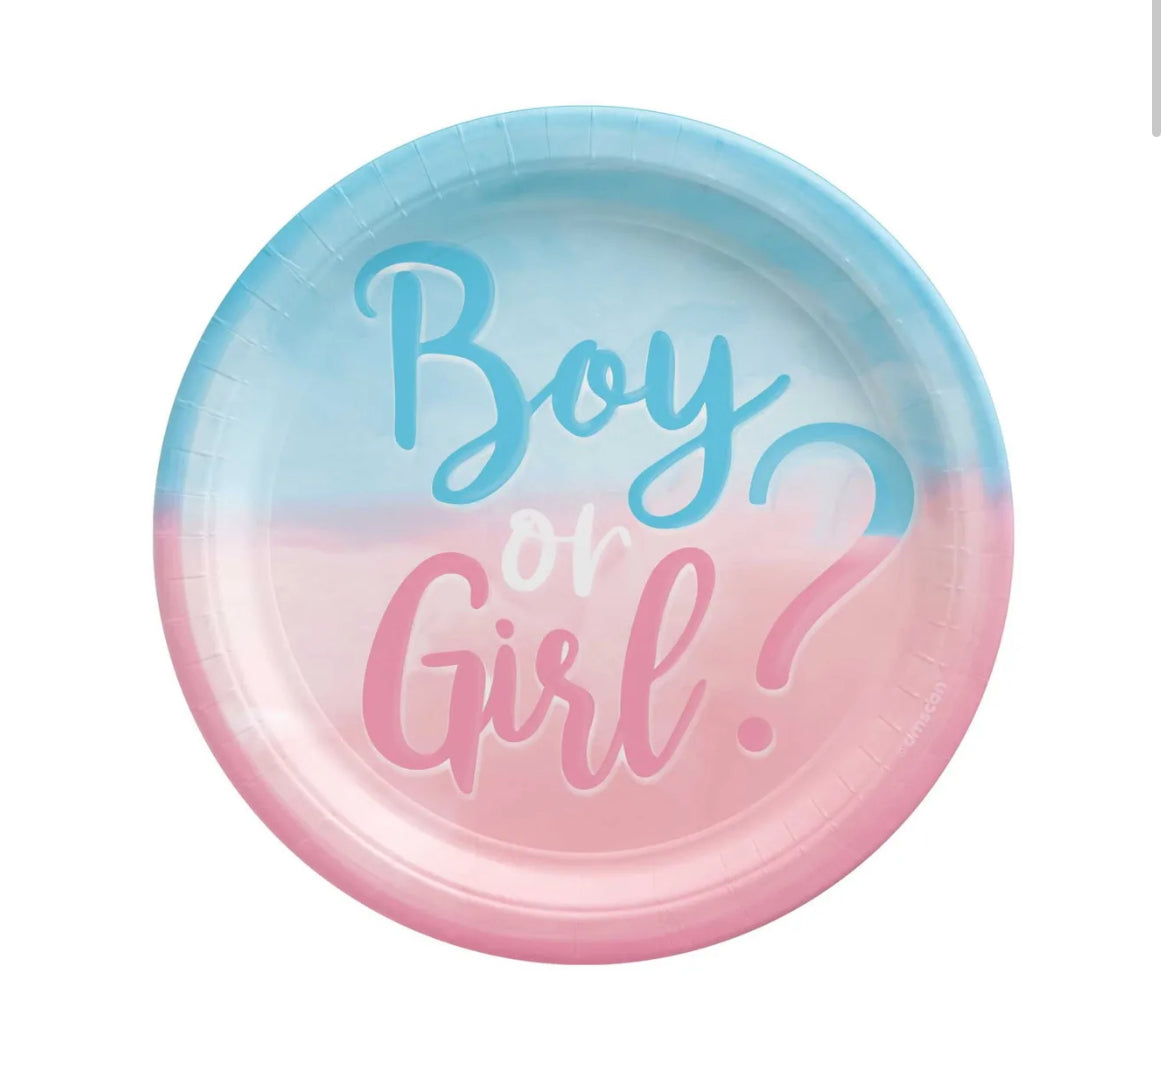 Boy or girl snack plates